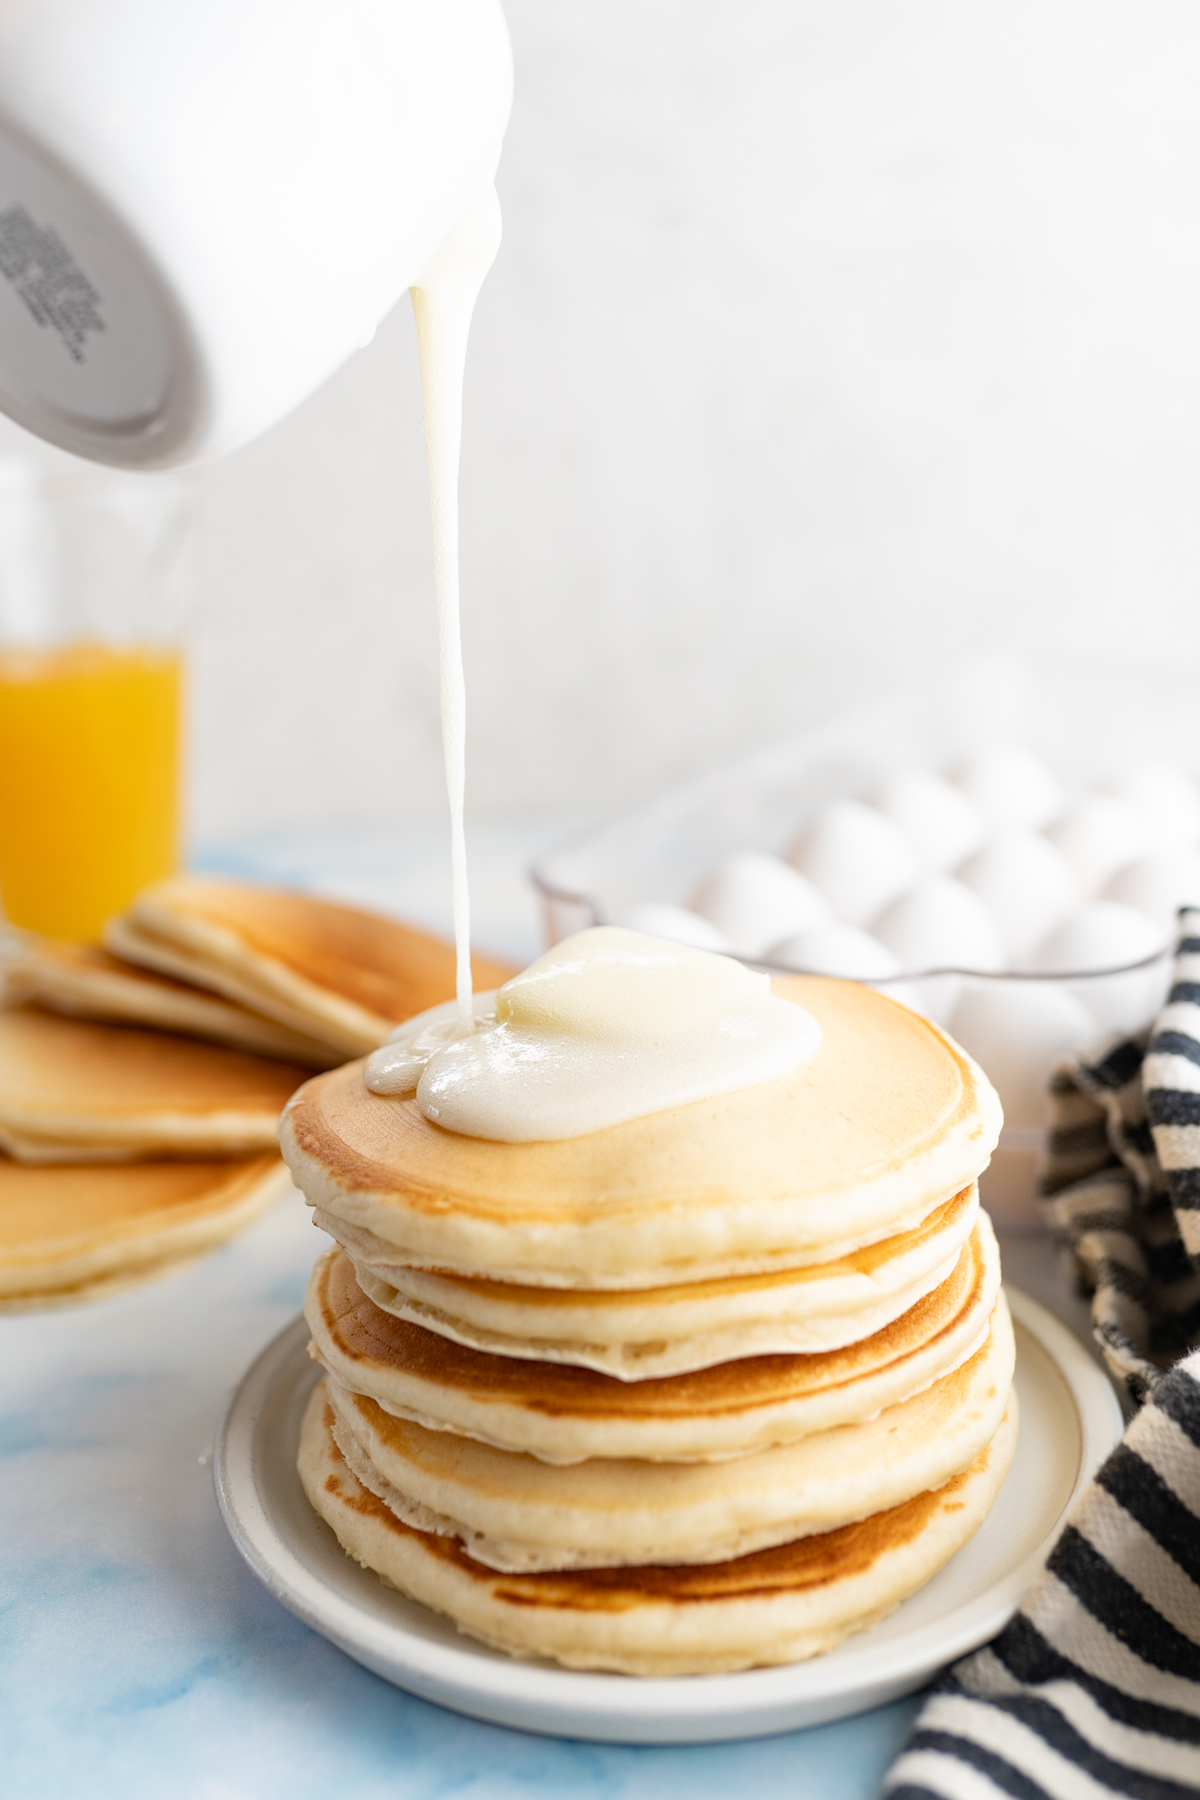 Image of buttermilk syrup being poured onto pancakes made from scratch. 